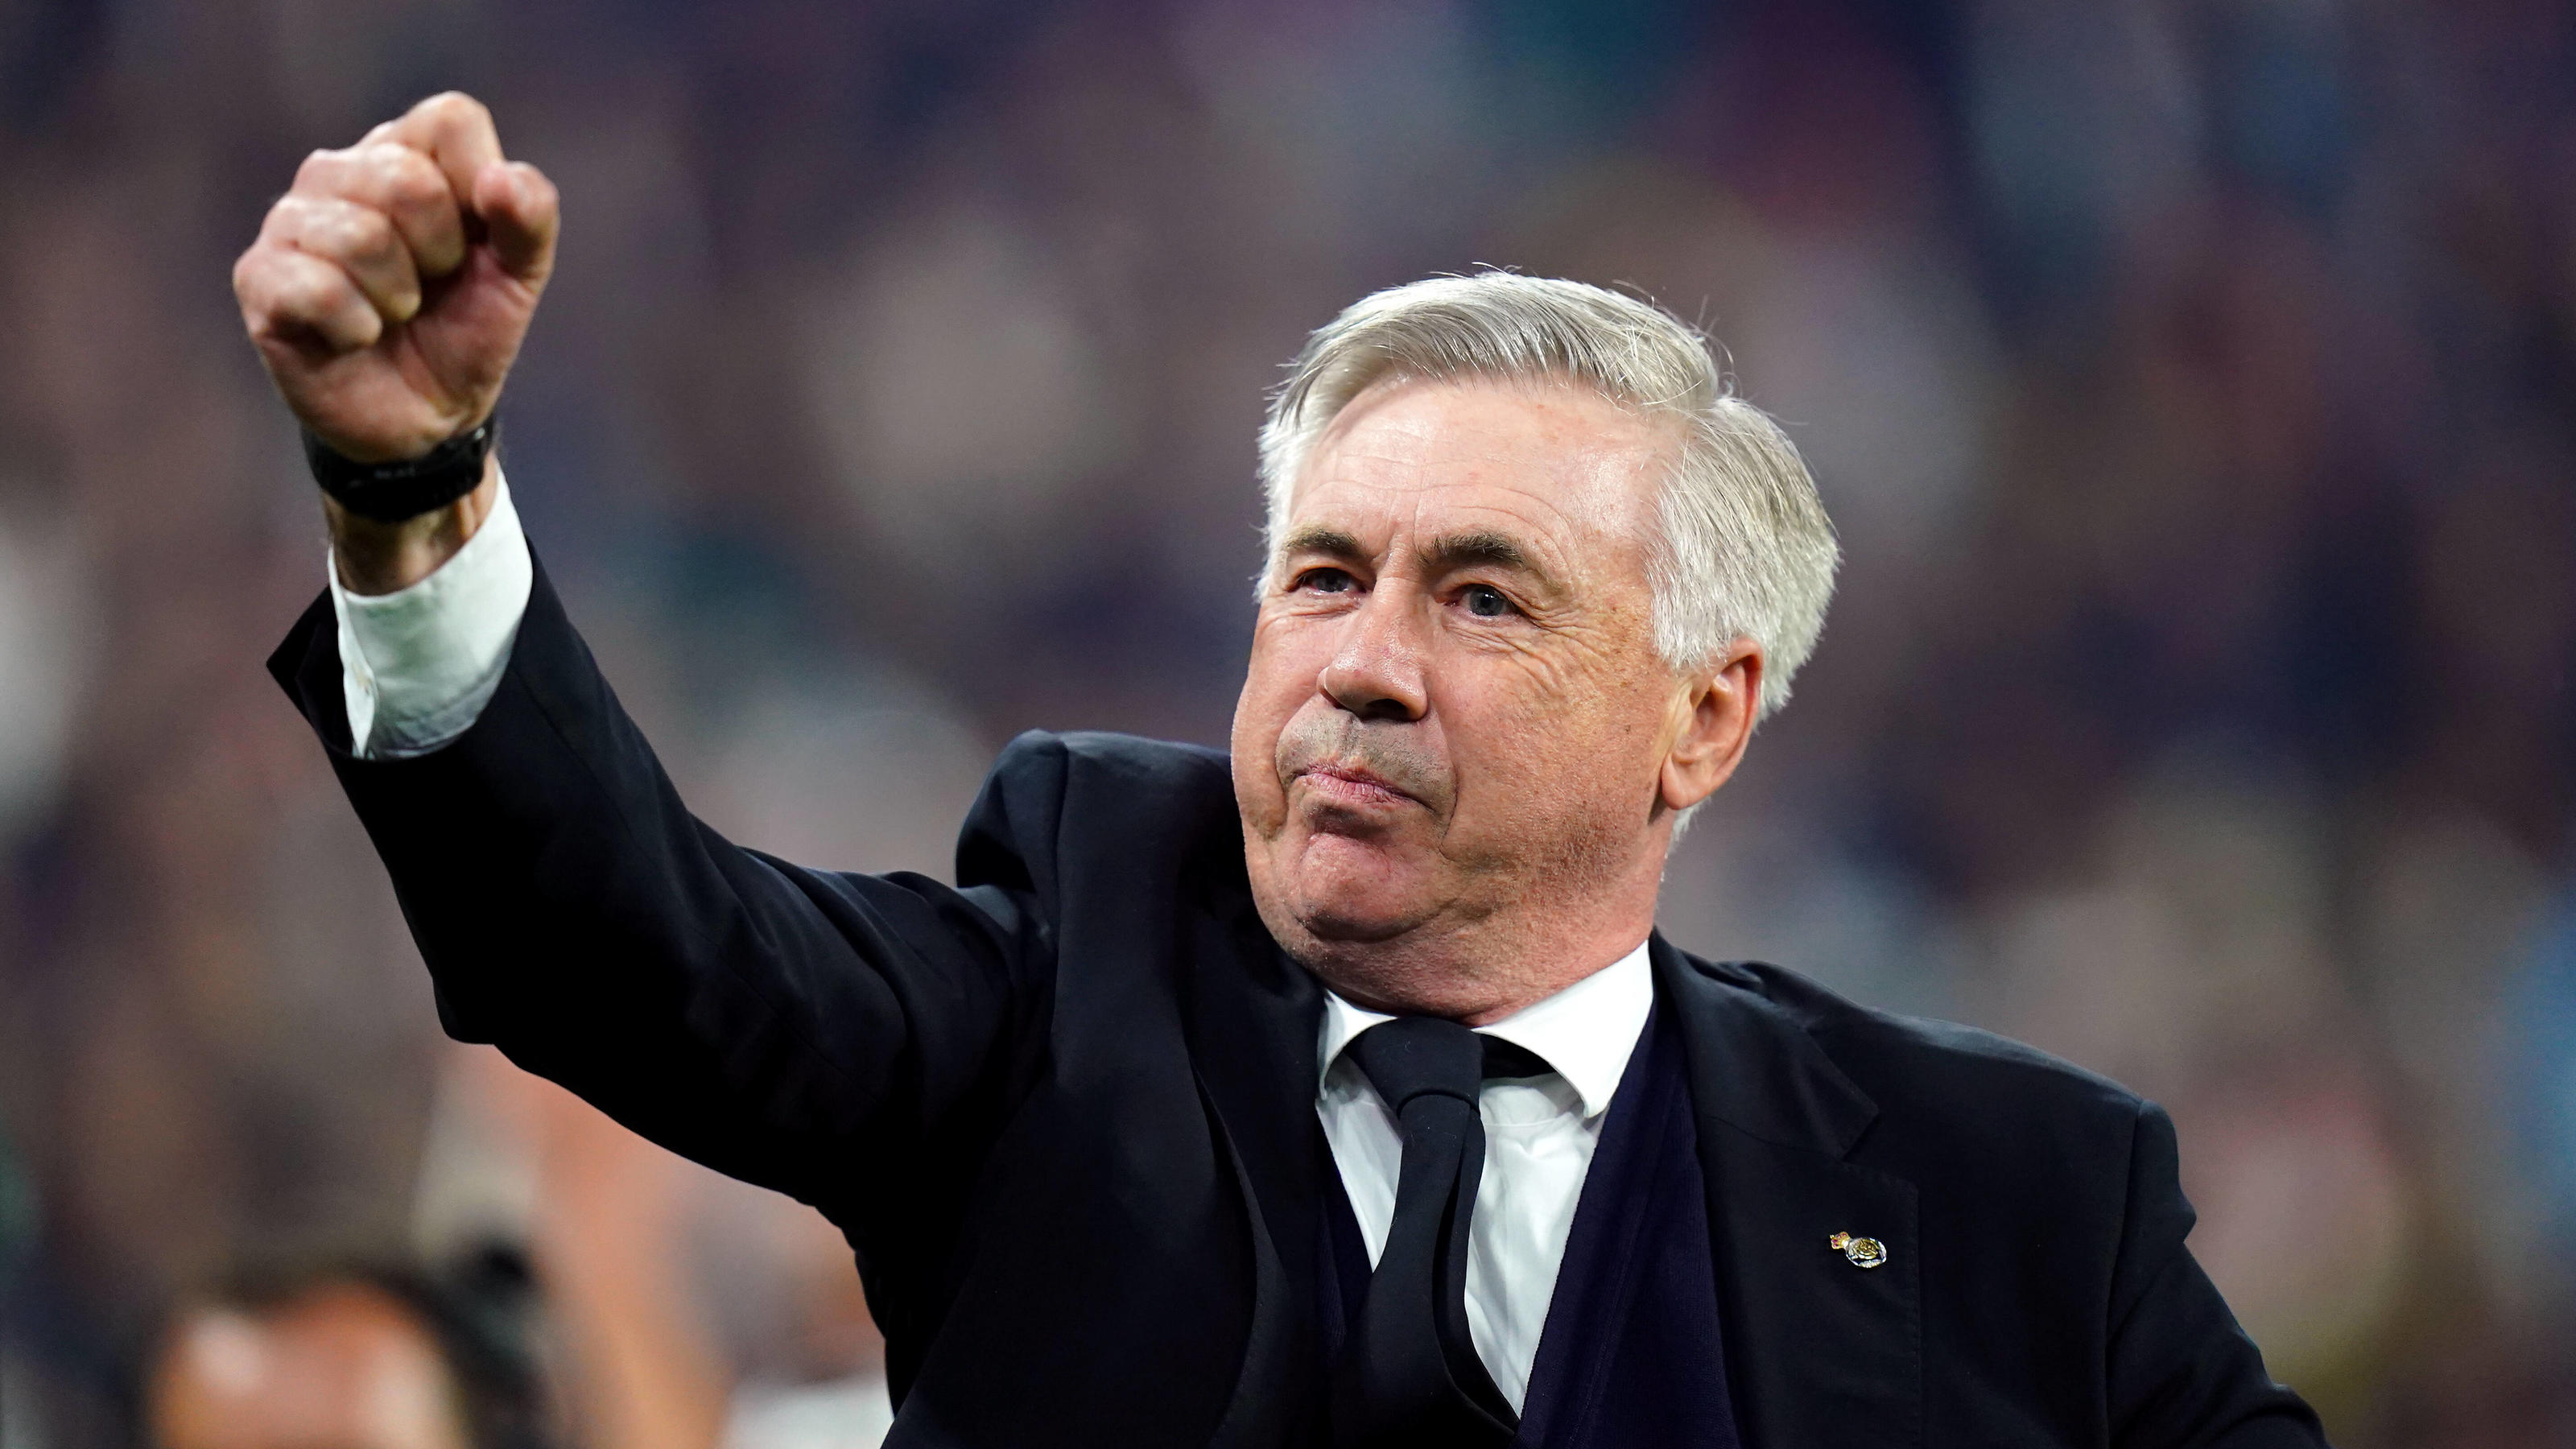  Liverpool v Real Madrid - UEFA Champions League - Final - Stade de France Real Madrid manager Carlo Ancelotti celebrates winning the UEFA Champions League Final at the Stade de France, Paris. Picture date: Saturday May 28, 2022. Use subject to restr